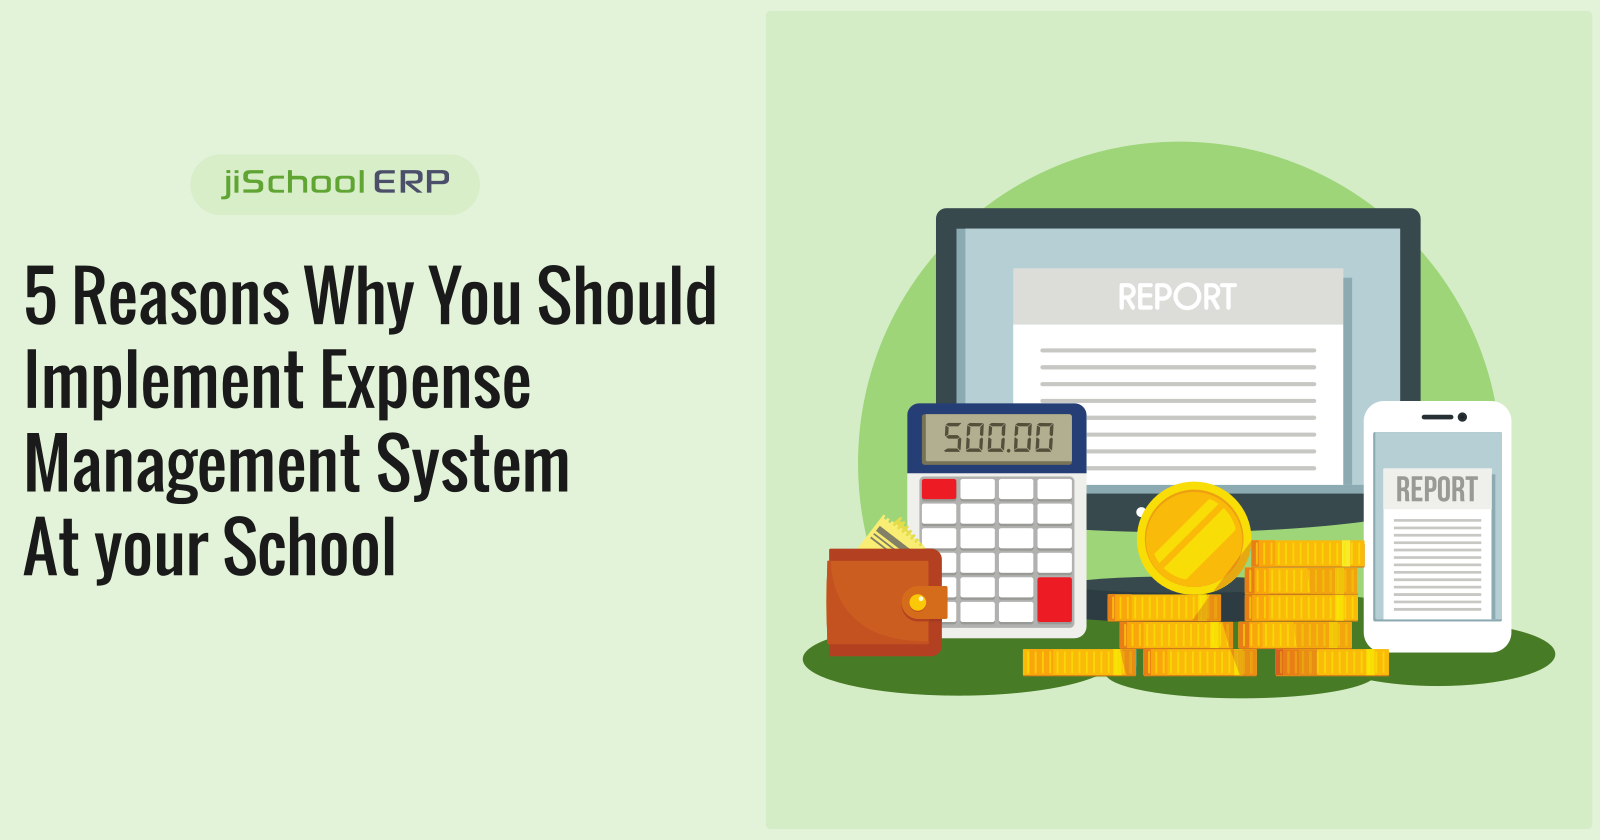 5 Reasons Why You Should Implement Expense Management System At your School